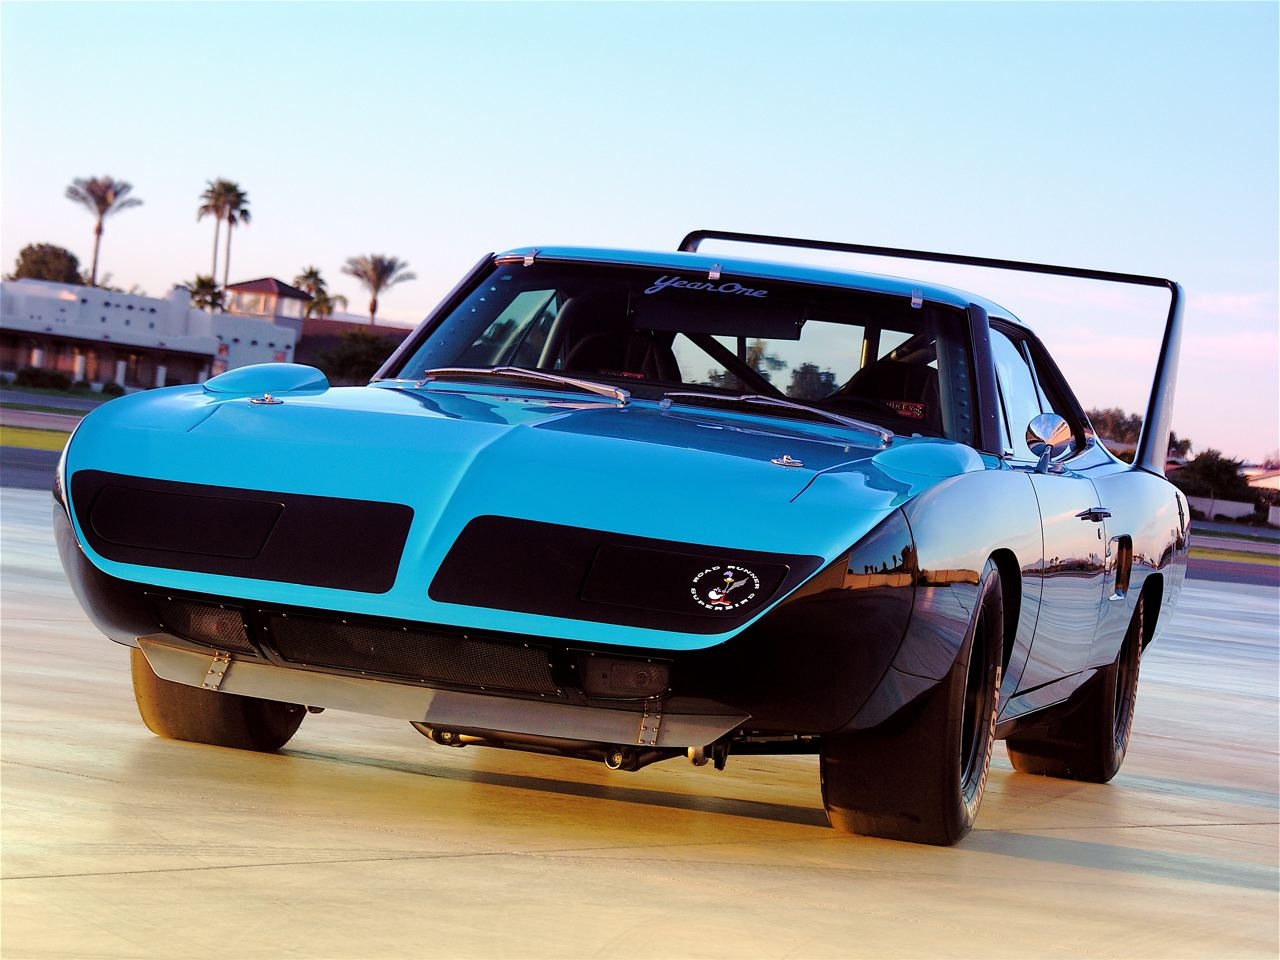 Goldbergs 1970 Superbird by Year One and Magnum Force